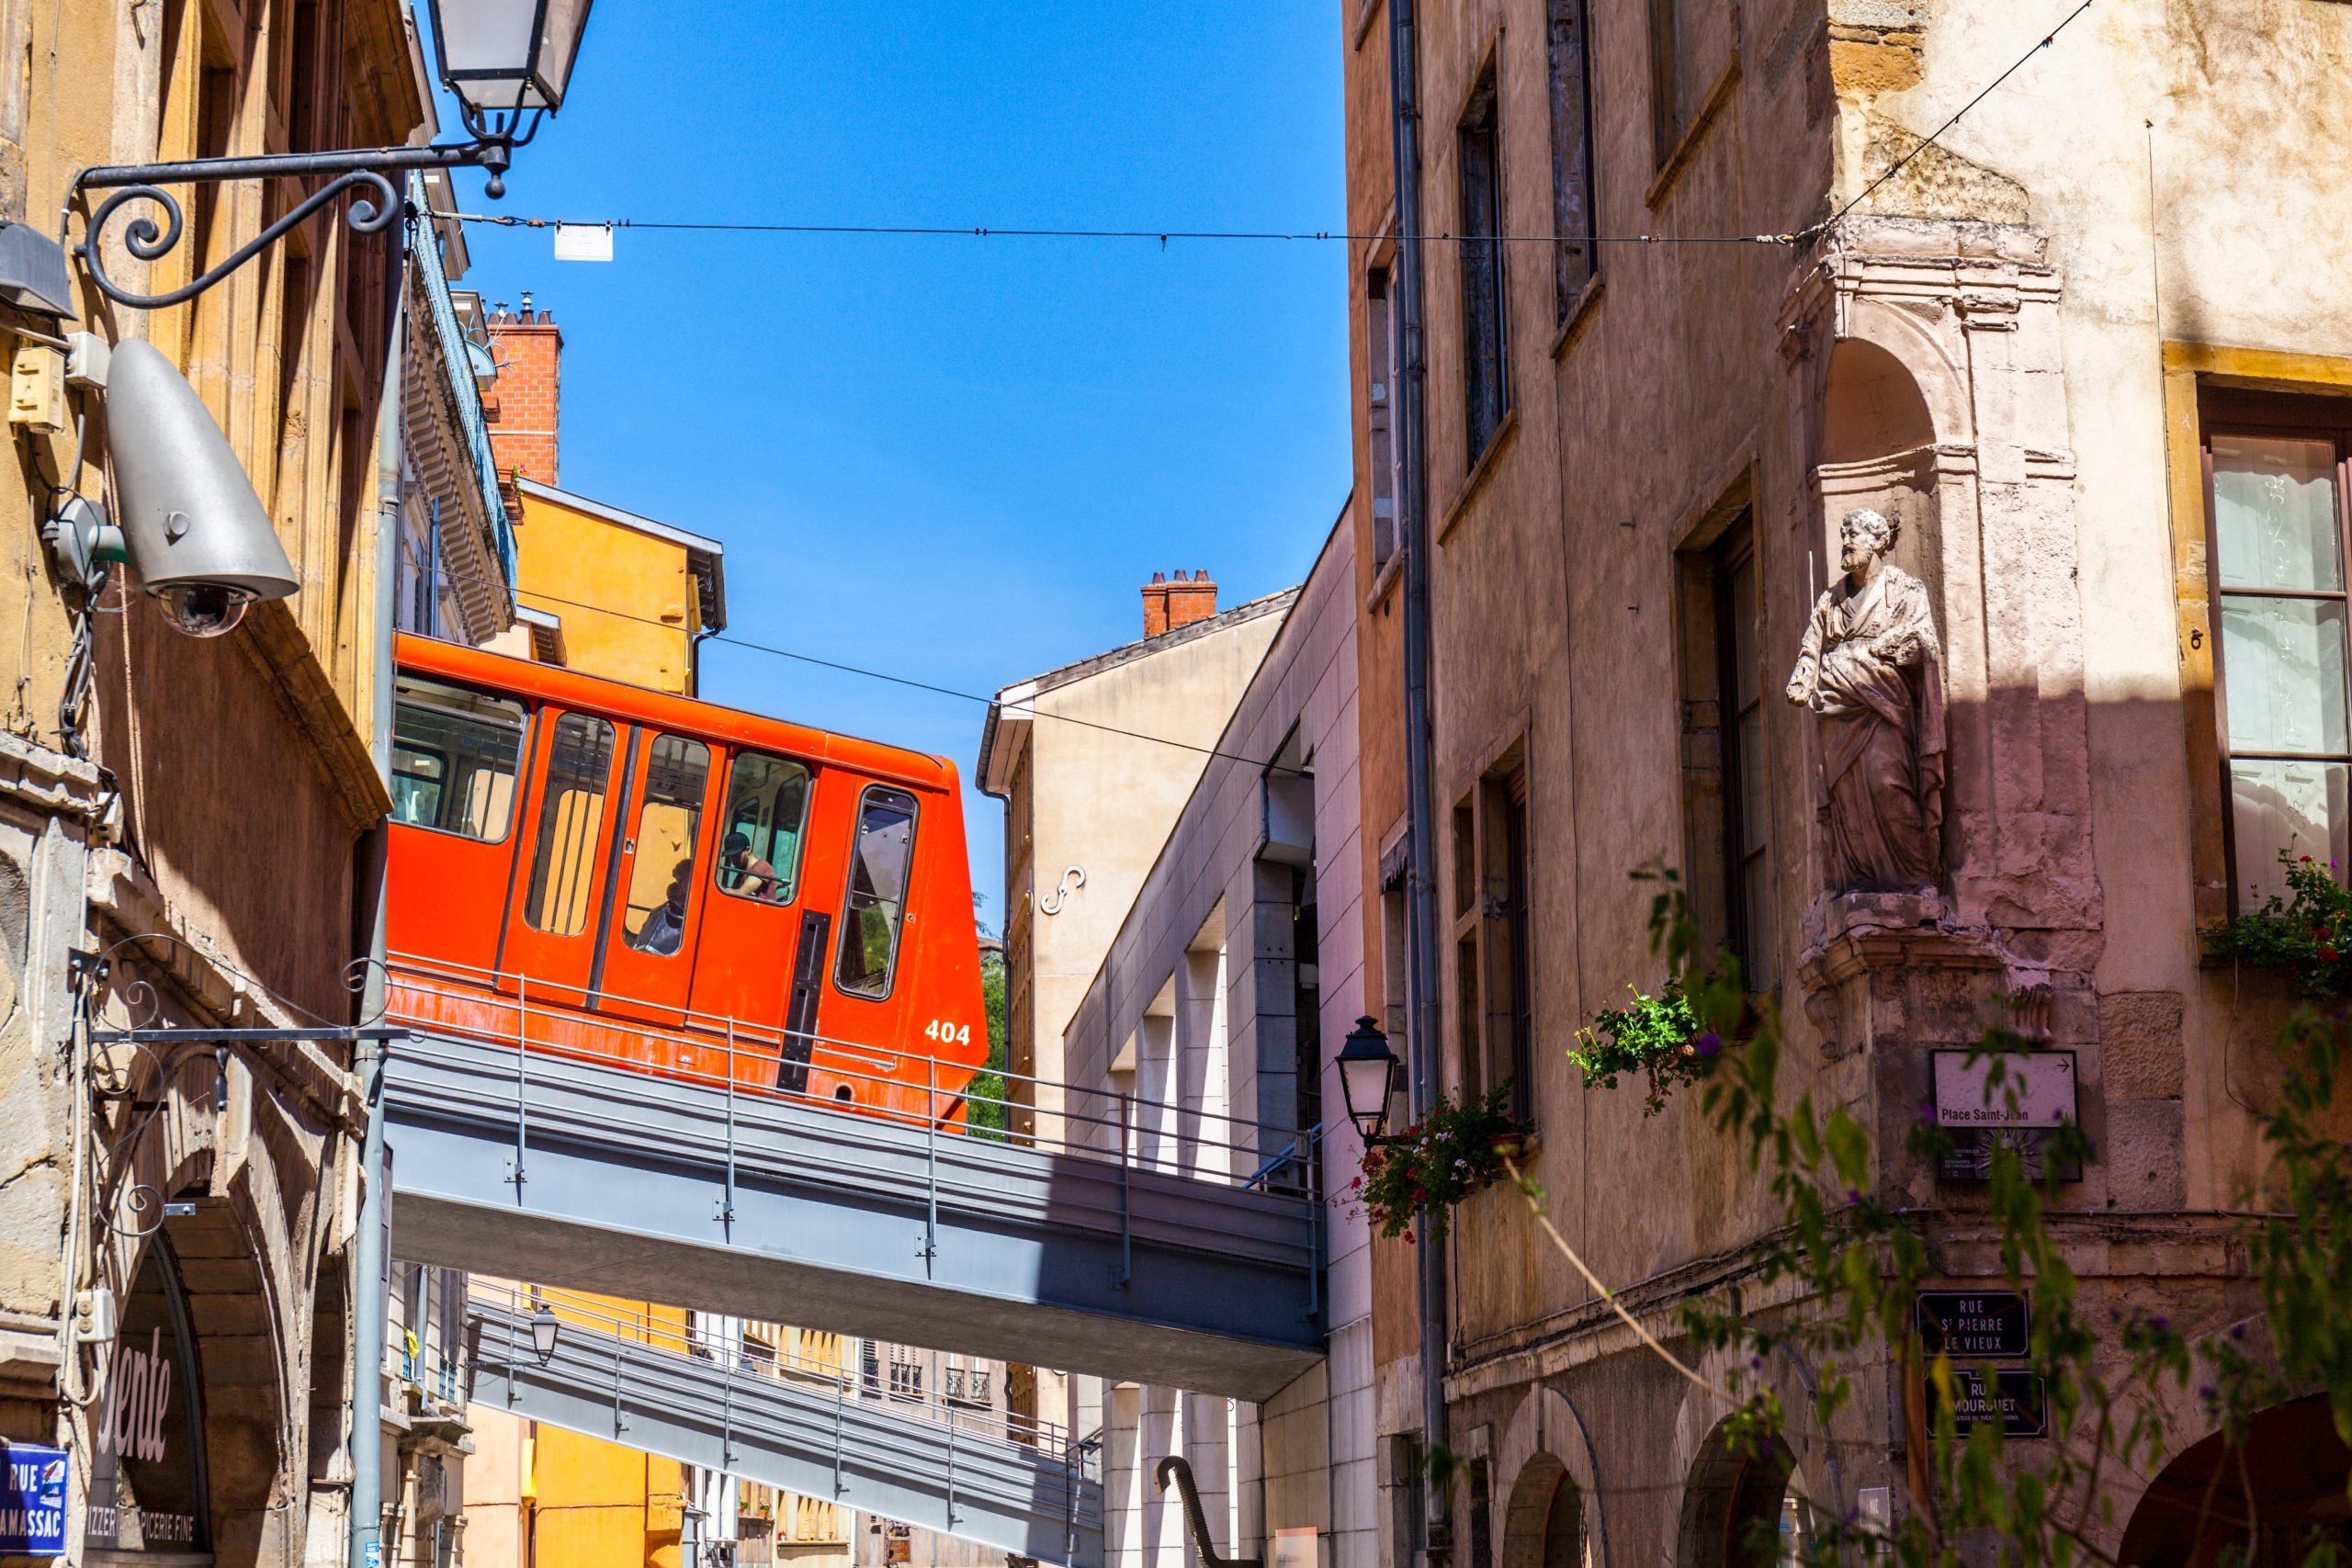 Lyon cable car which connects the old town with the hill Fourviere with its basilica.